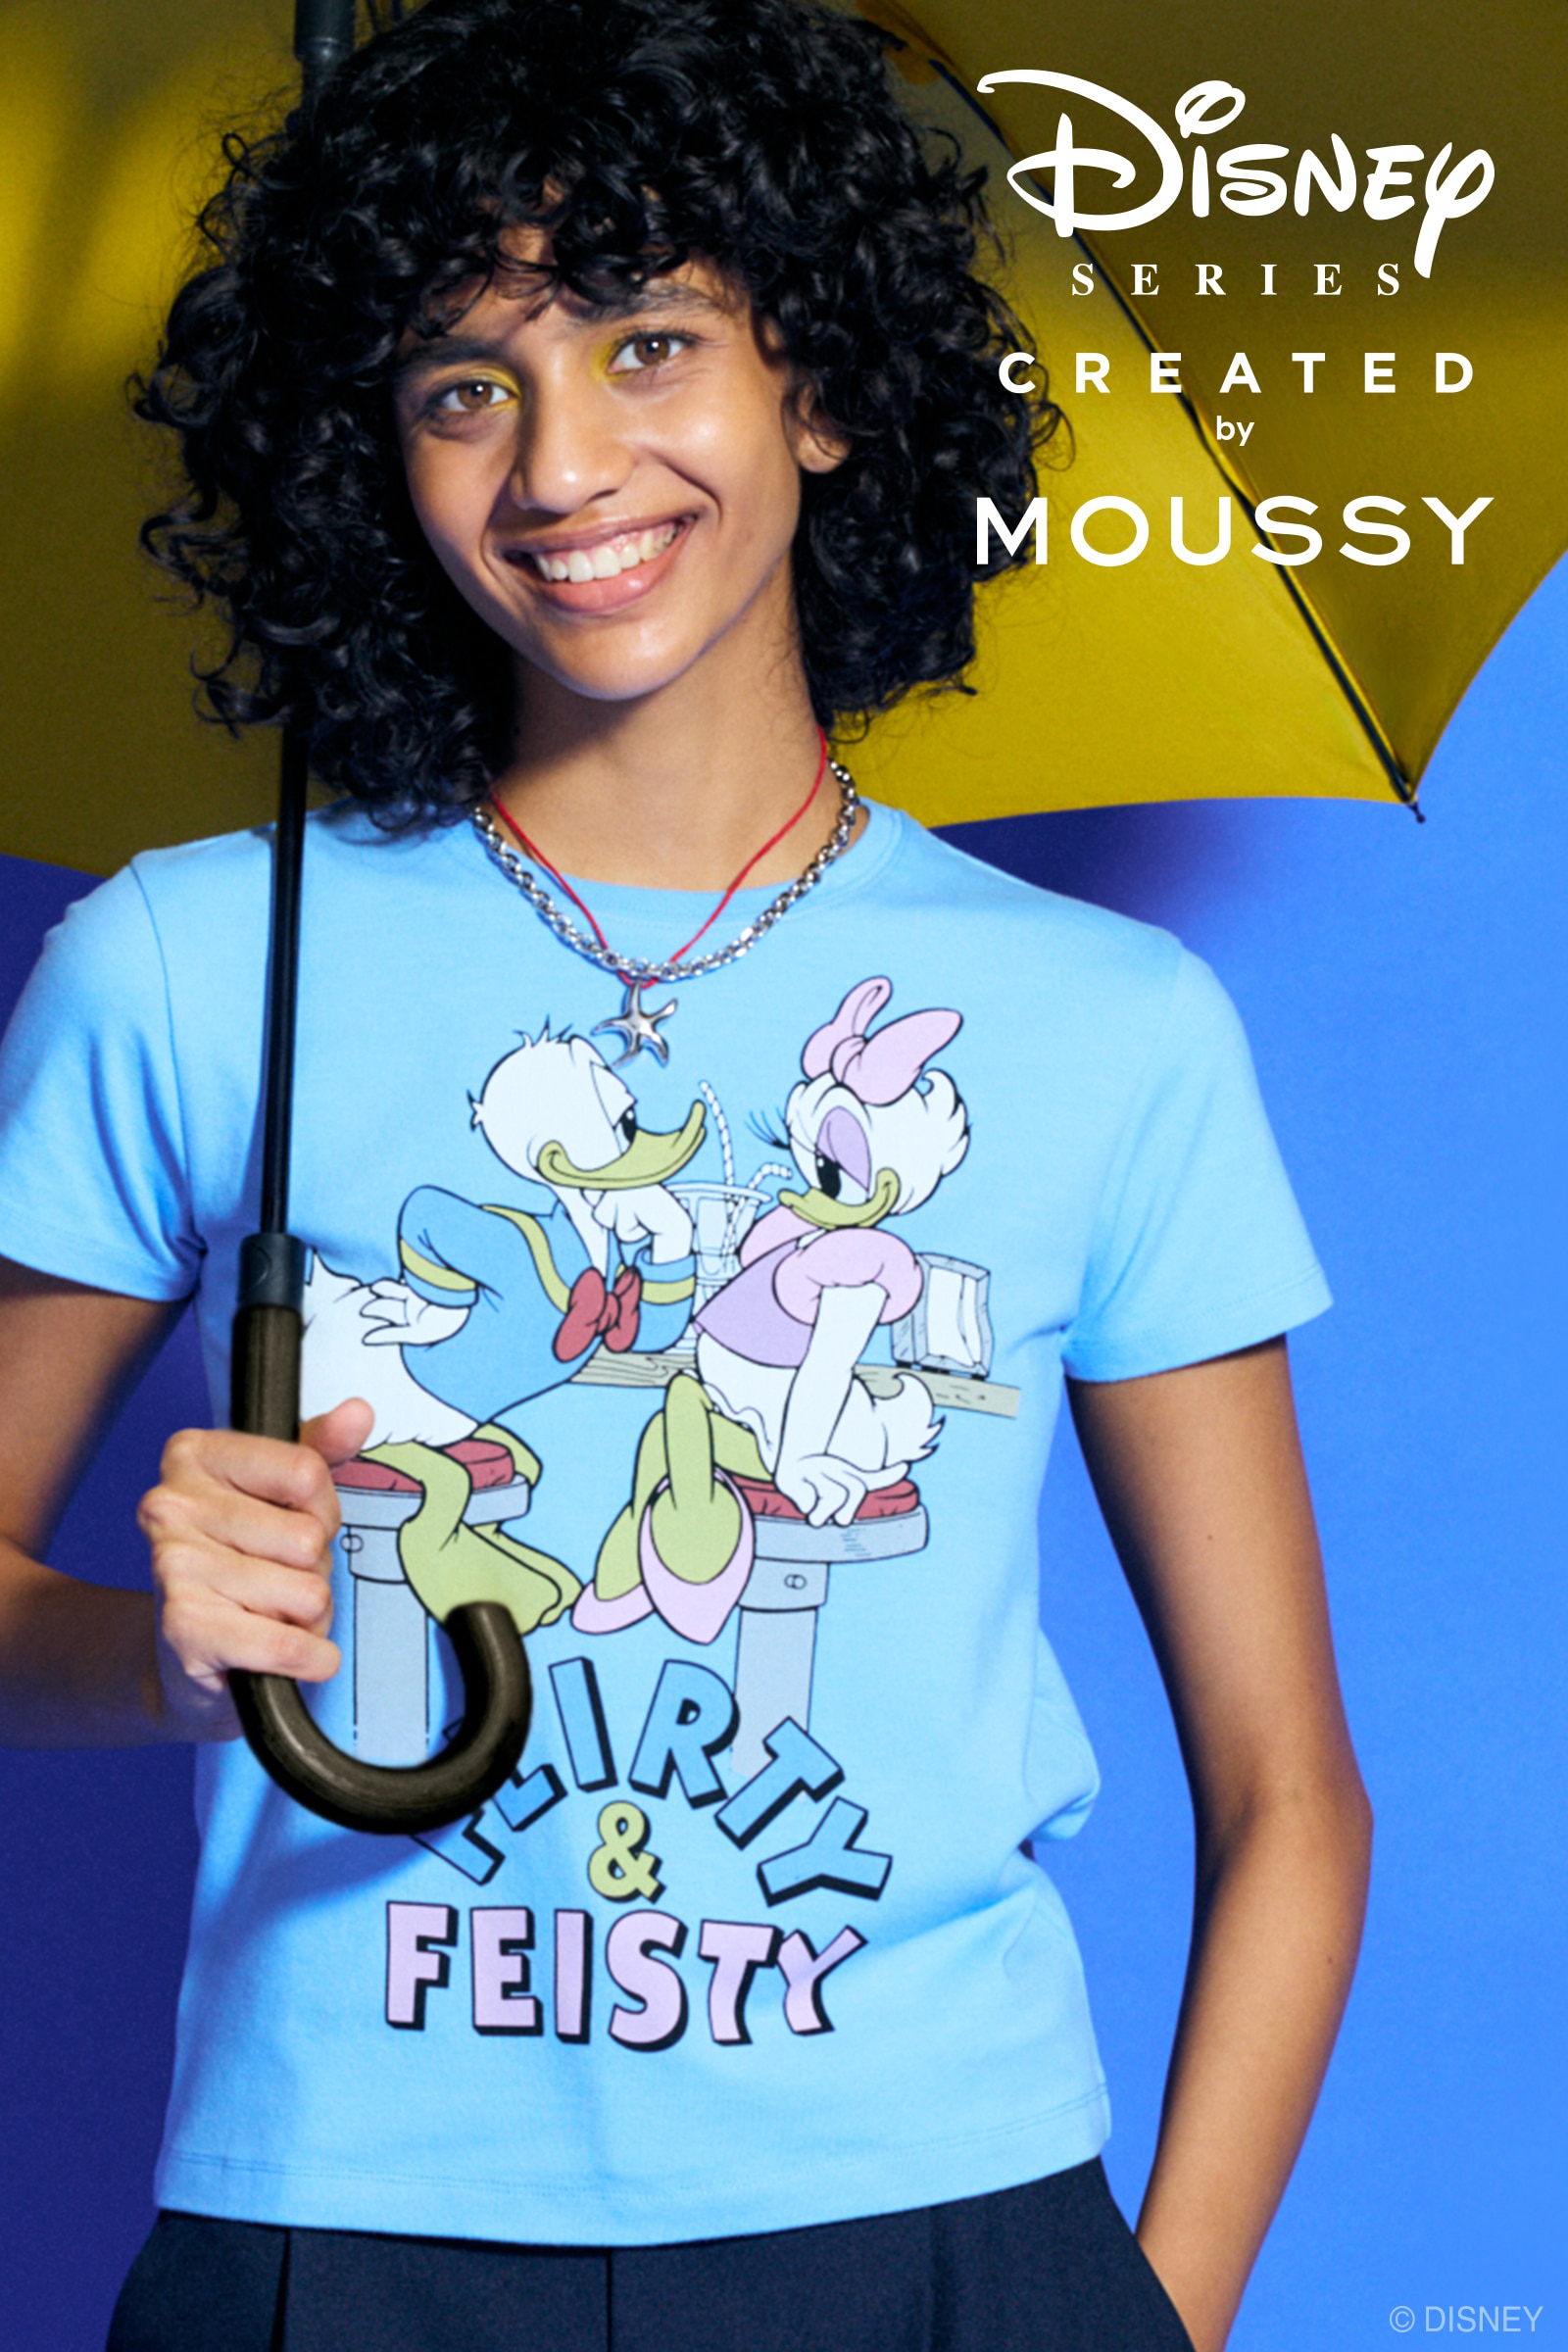 Disney SERIES CREATED by MOUSSYの公式通販サイト|SHEL'TTER WEB STORE